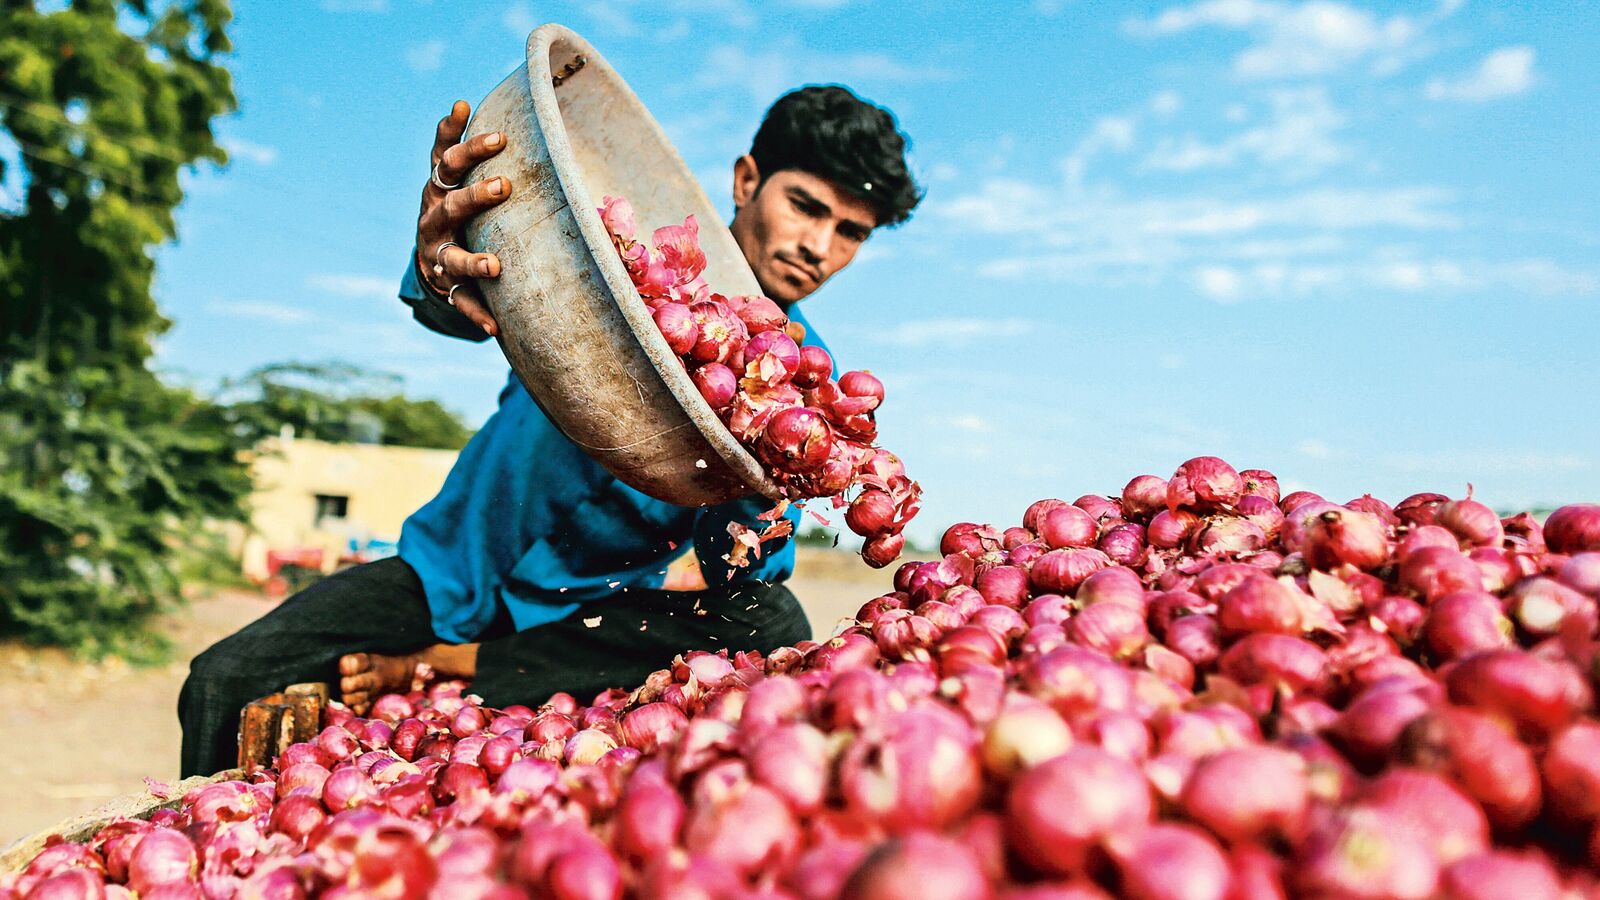 Onion prices go up by Tk 50-60 per kg in Khulna as India bans export